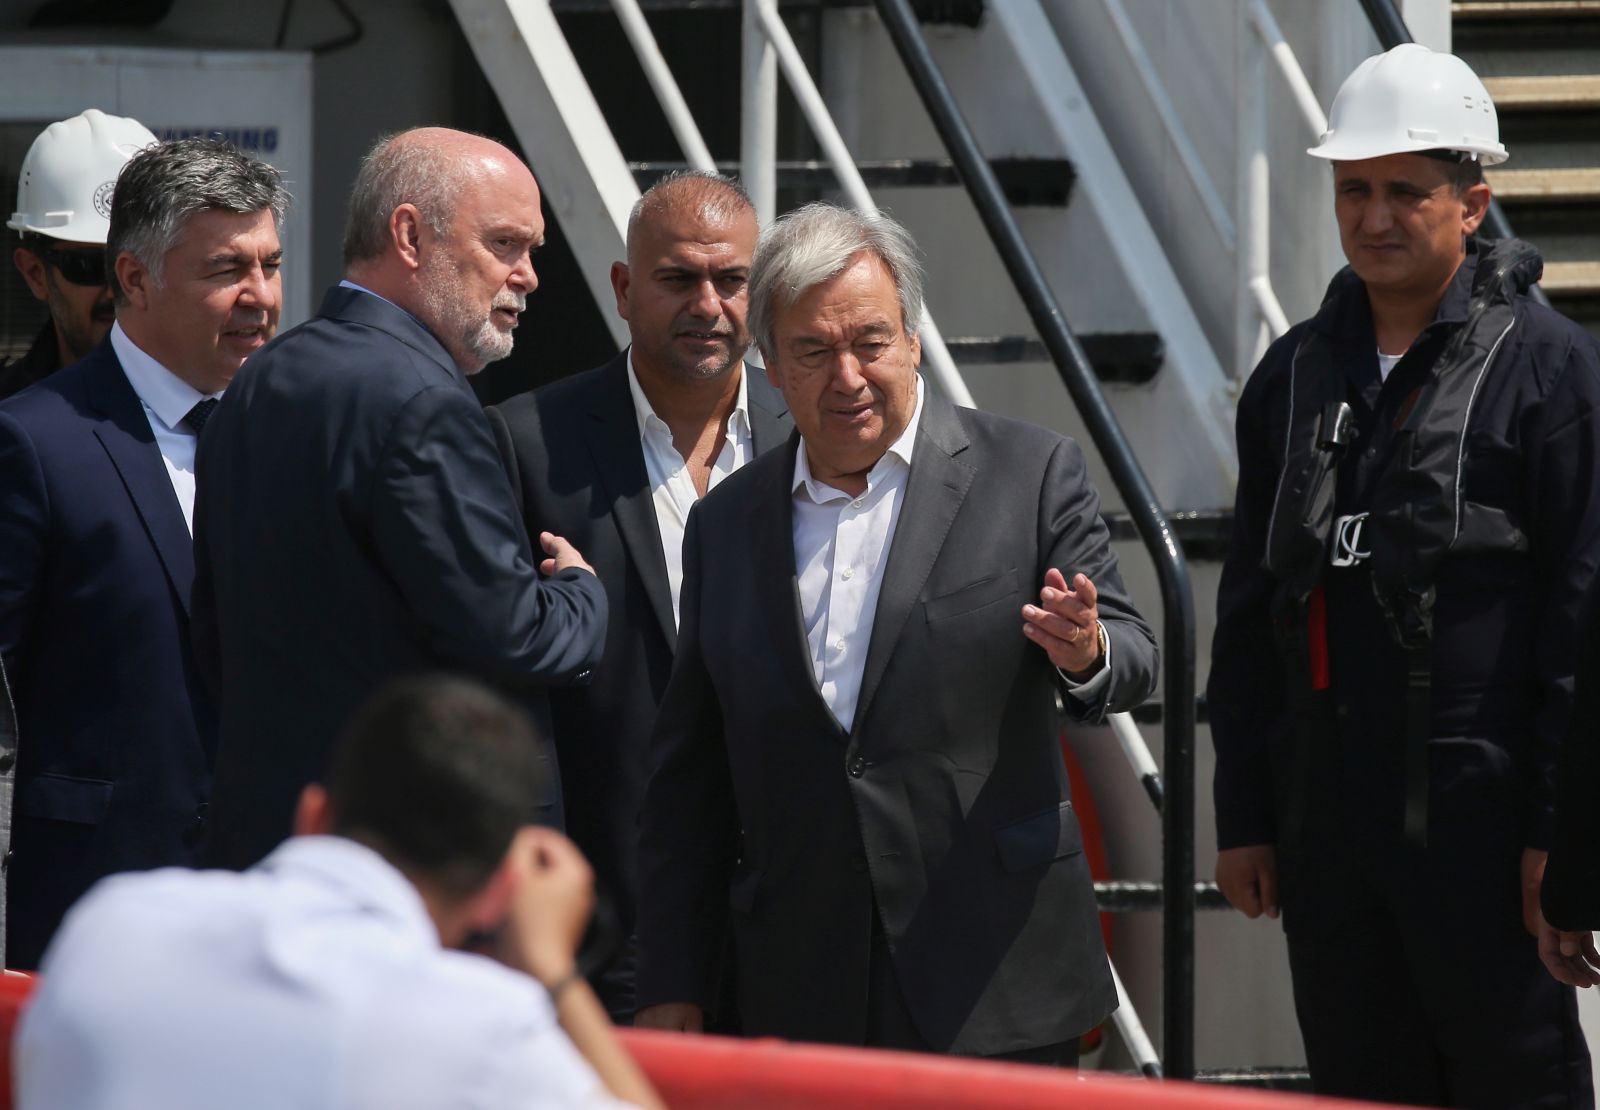 epa10130264 UN Secretary-General Antonio Guterres (C) arrives at the Zeyport to inspect a grain shipment before his Joint Coordination Center (JCC) in Istanbul, Turkey, 20 August 2022. A safe passage deal was signed between Ukraine and Russia to export Ukrainian grain on 22 July in Istanbul.  EPA/ERDEM SAHIN